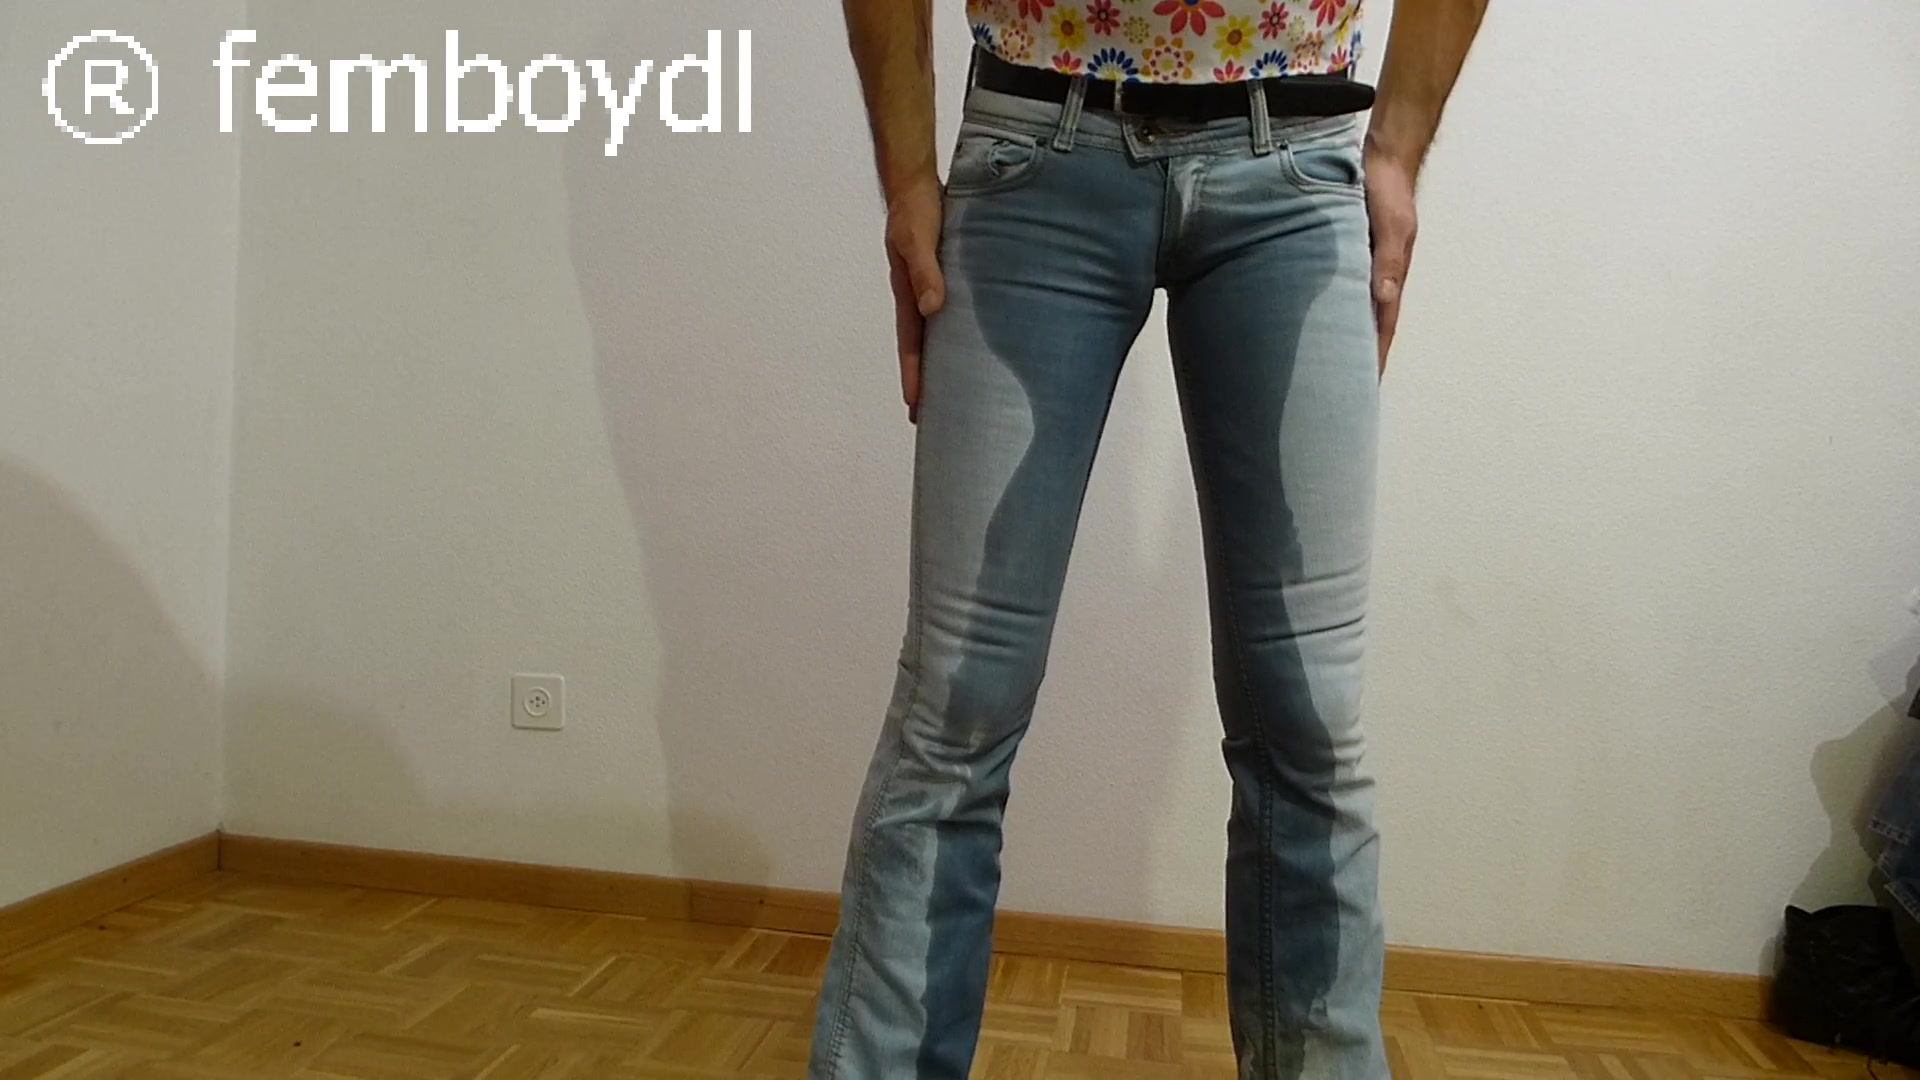 wetting extremely tight tally weijl jeans while learning english ;-)